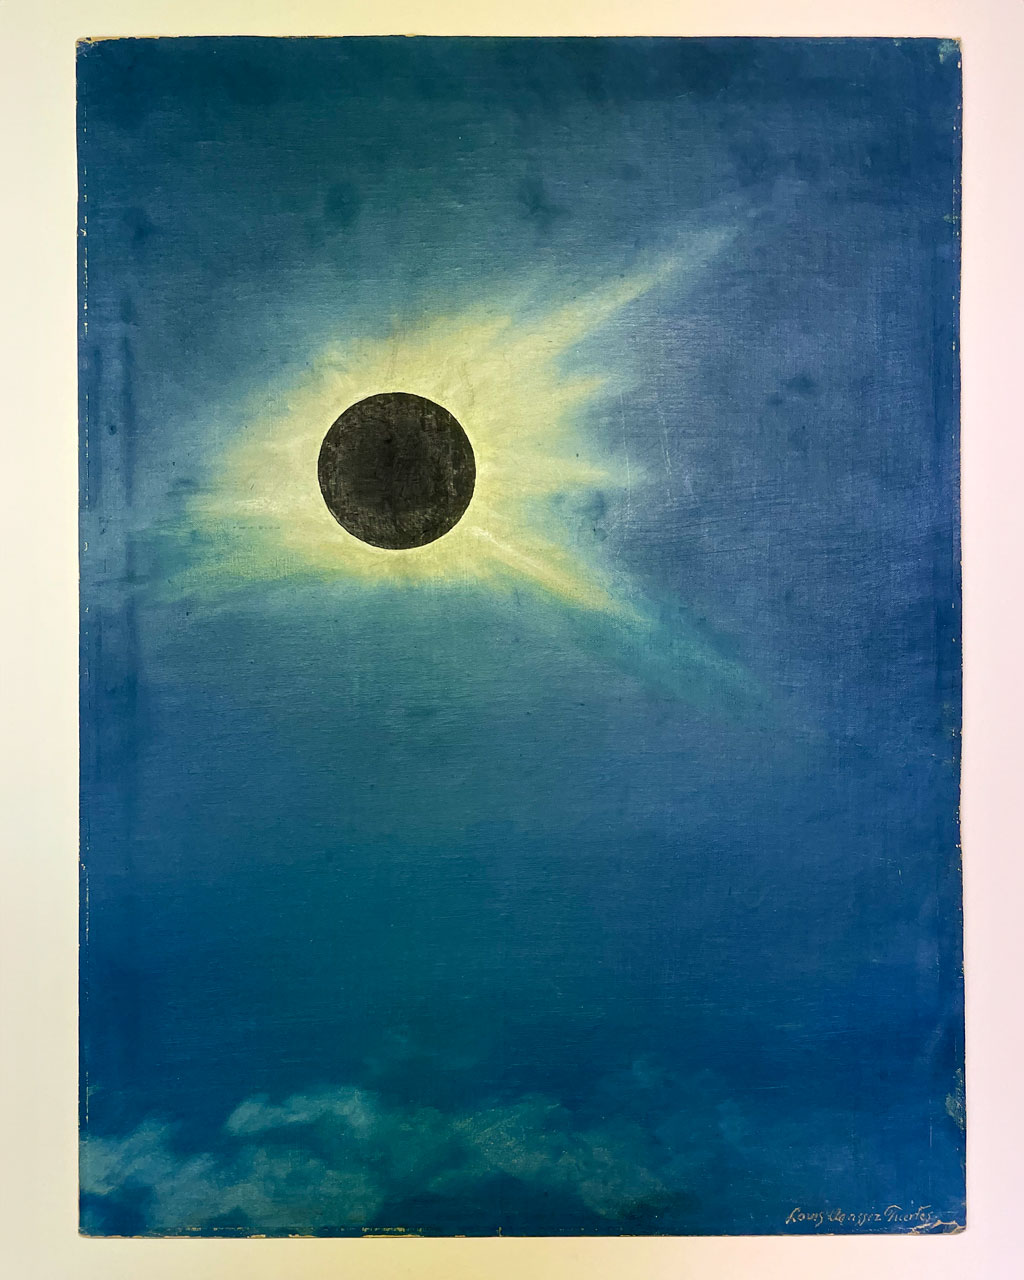 A painting of the 1925 solar eclipse by Louis Agassiz Fuertes